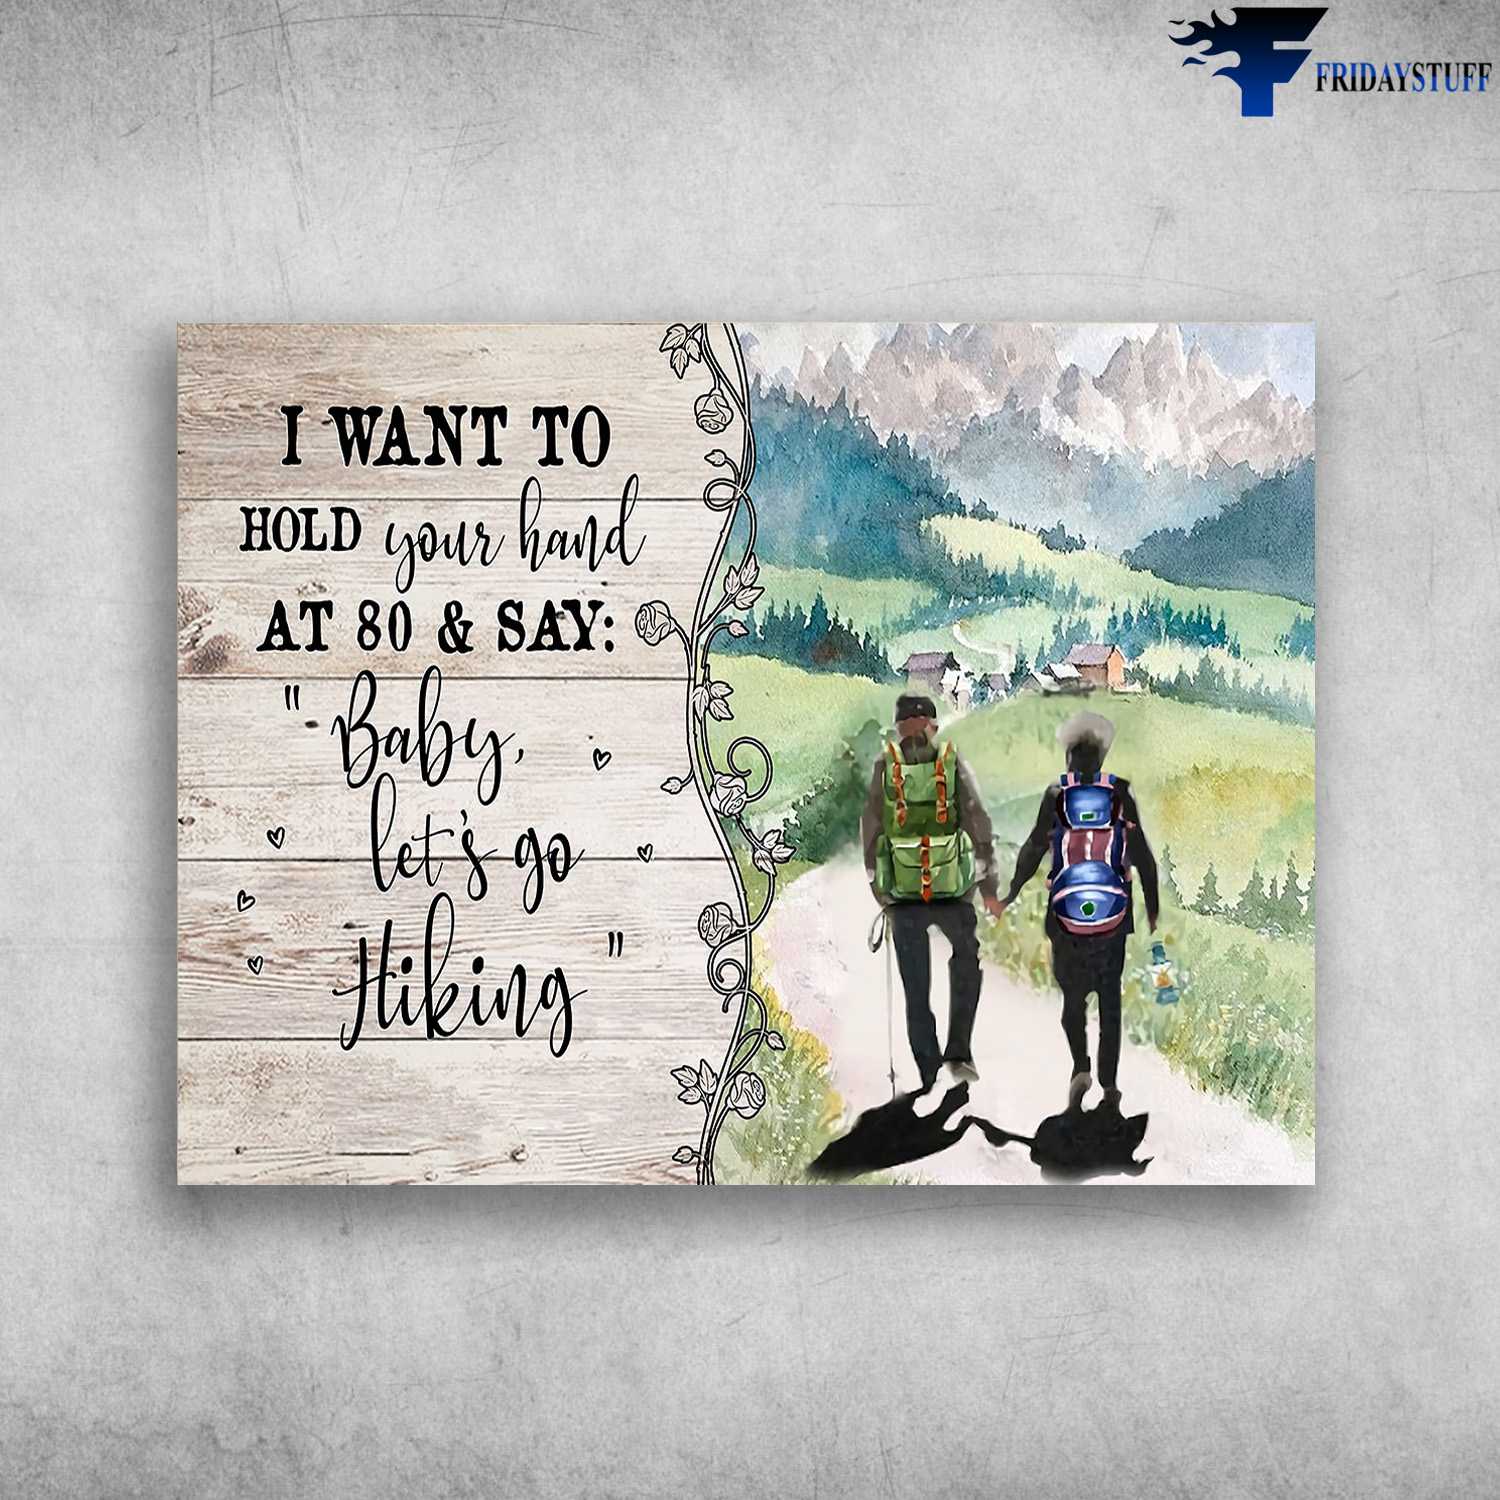 Hountain Hiking, Couple Hiling - I Want To Hold Your Hand At 80 And Say, Baby Let's Go HikingHountain Hiking, Couple Hiling - I Want To Hold Your Hand At 80 And Say, Baby Let's Go Hiking